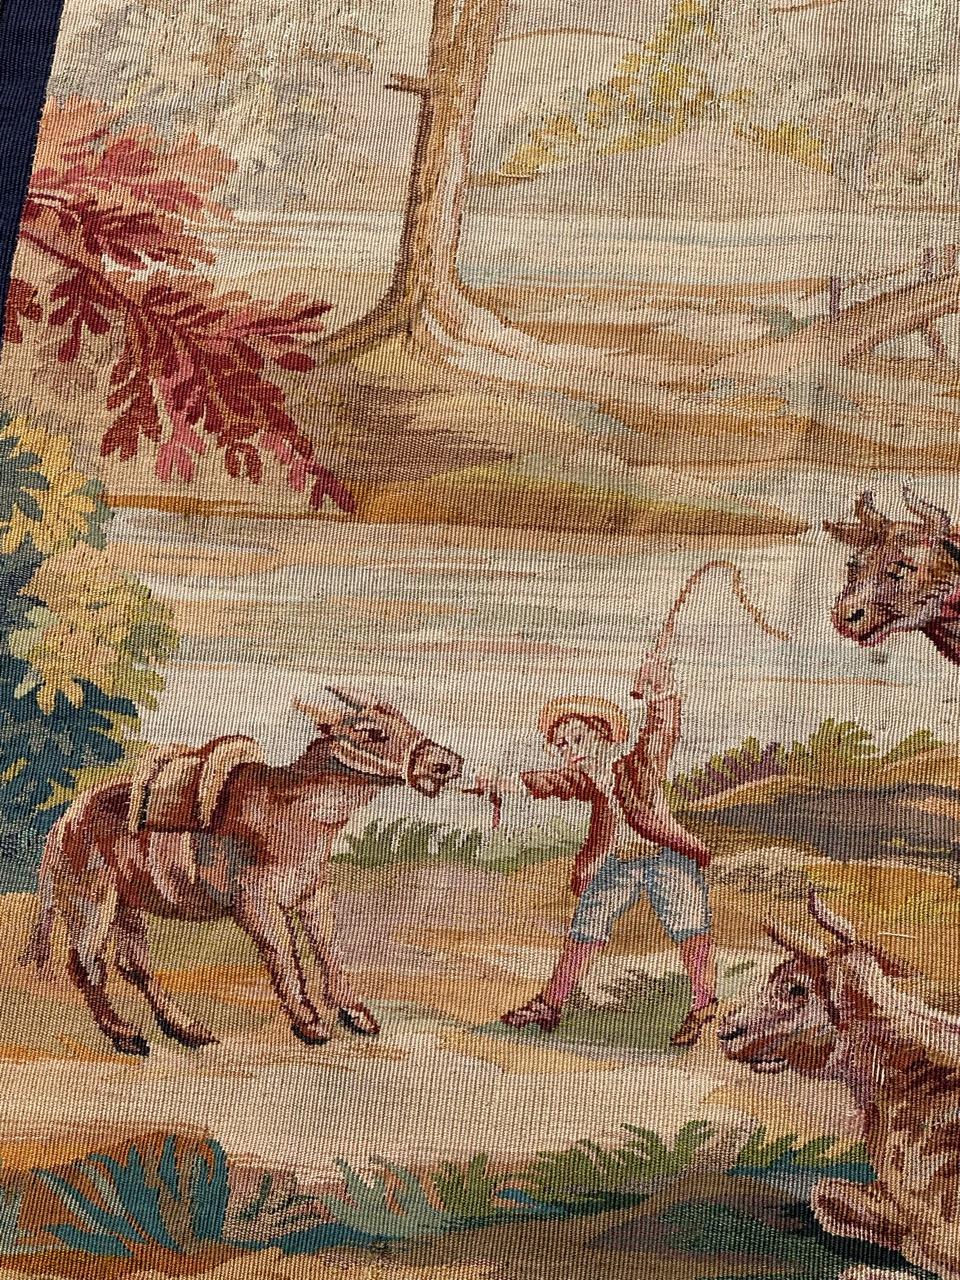 Bobyrug’s Wonderful Fine Antique French Aubusson Tapestry 8